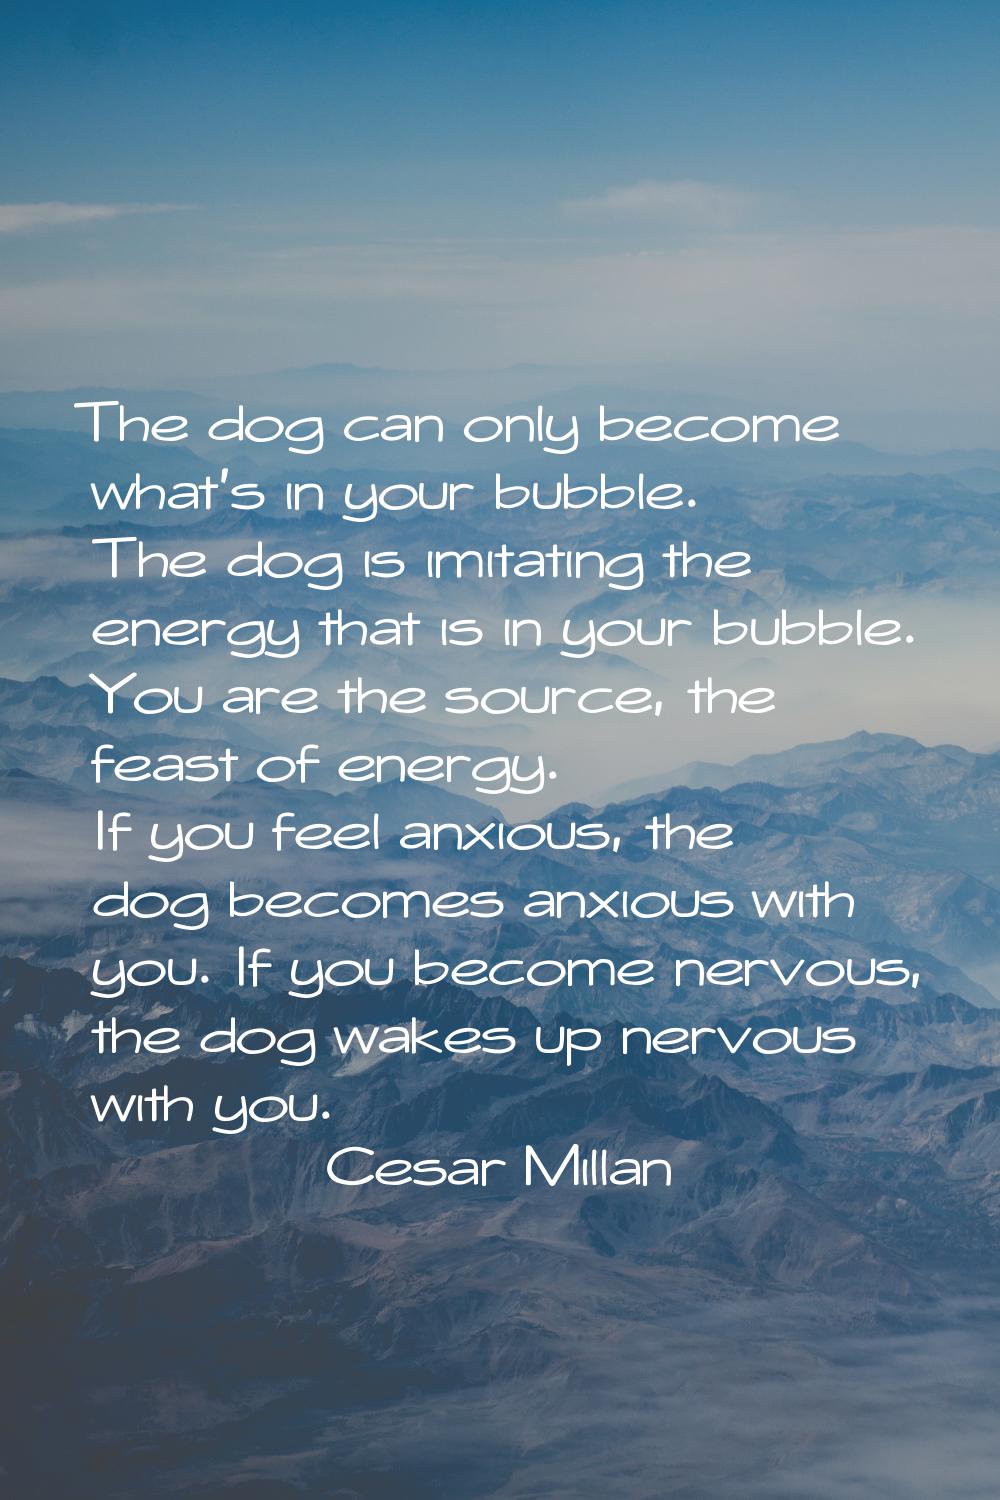 The dog can only become what's in your bubble. The dog is imitating the energy that is in your bubb